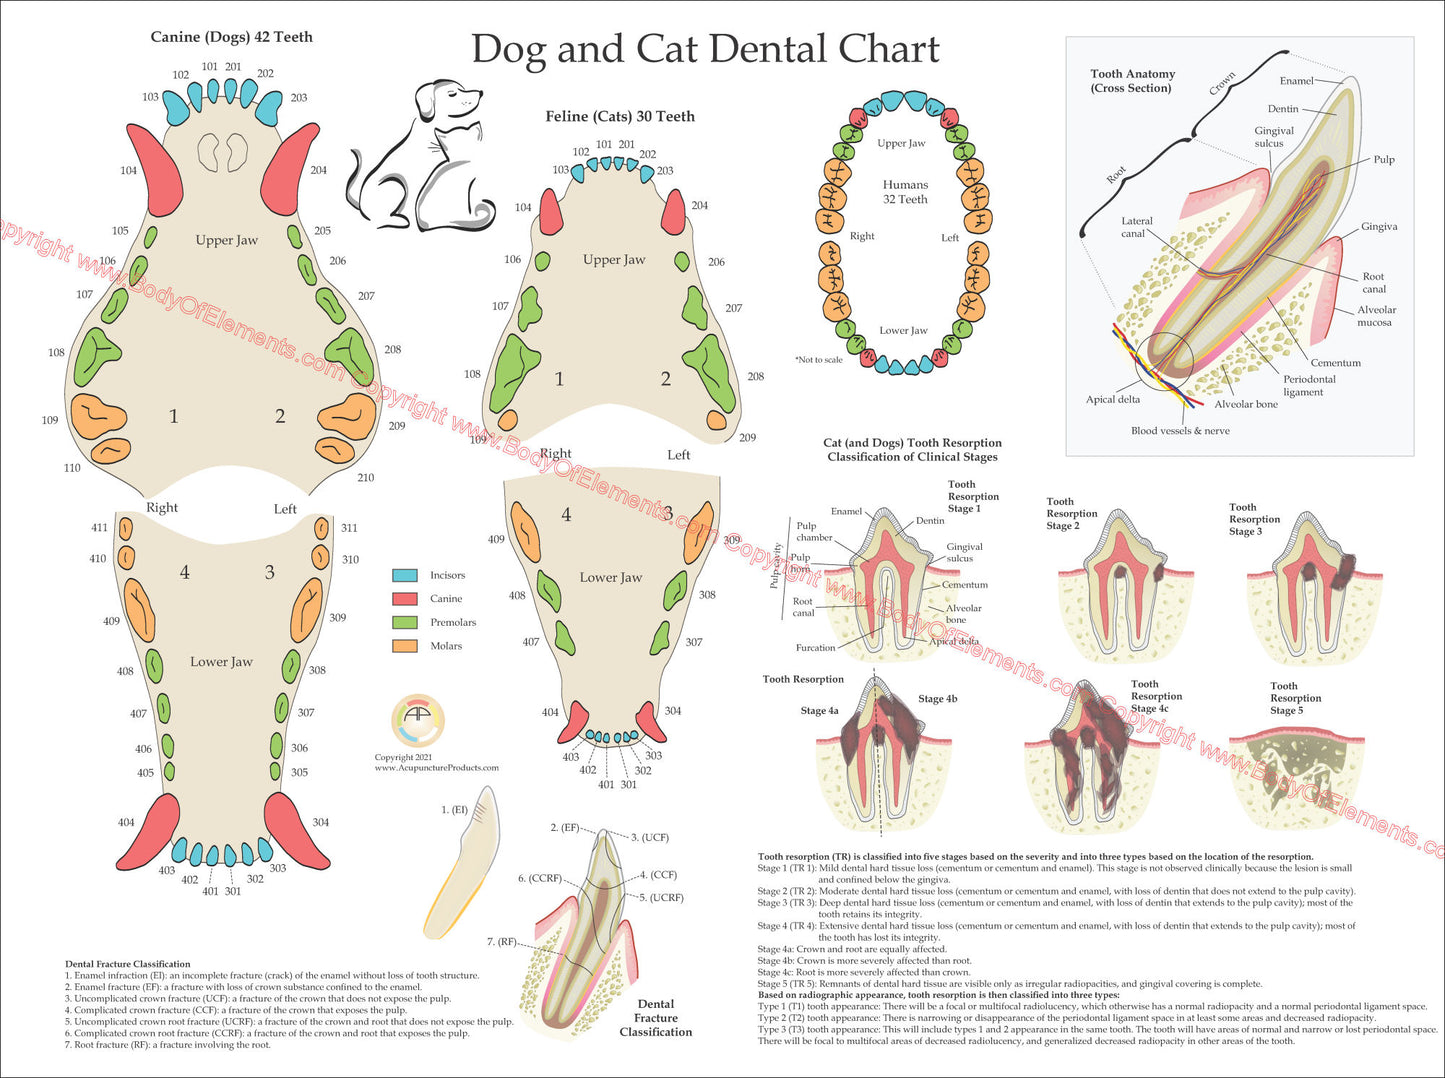 Dog and cat dental numbering system chart